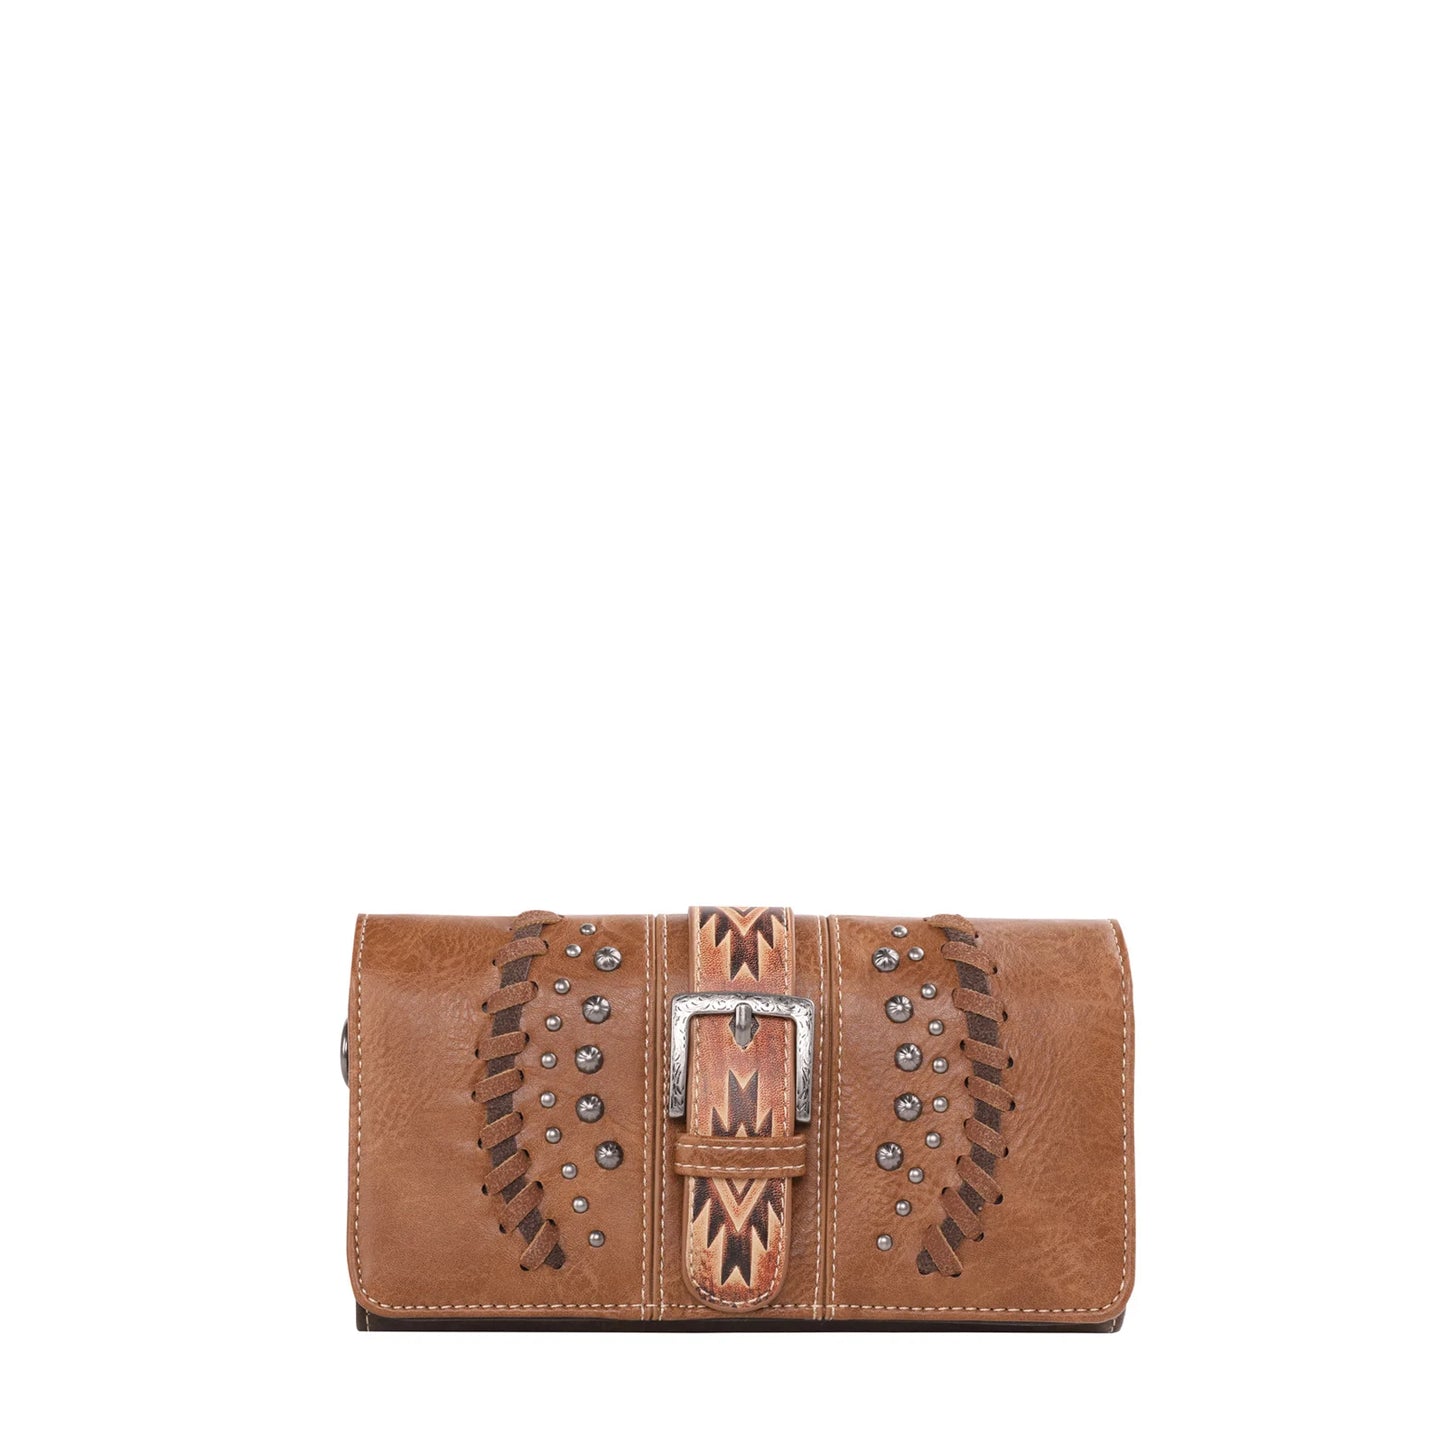 MW1134W018 - Montana West Aztec Tooled Collection Wallet